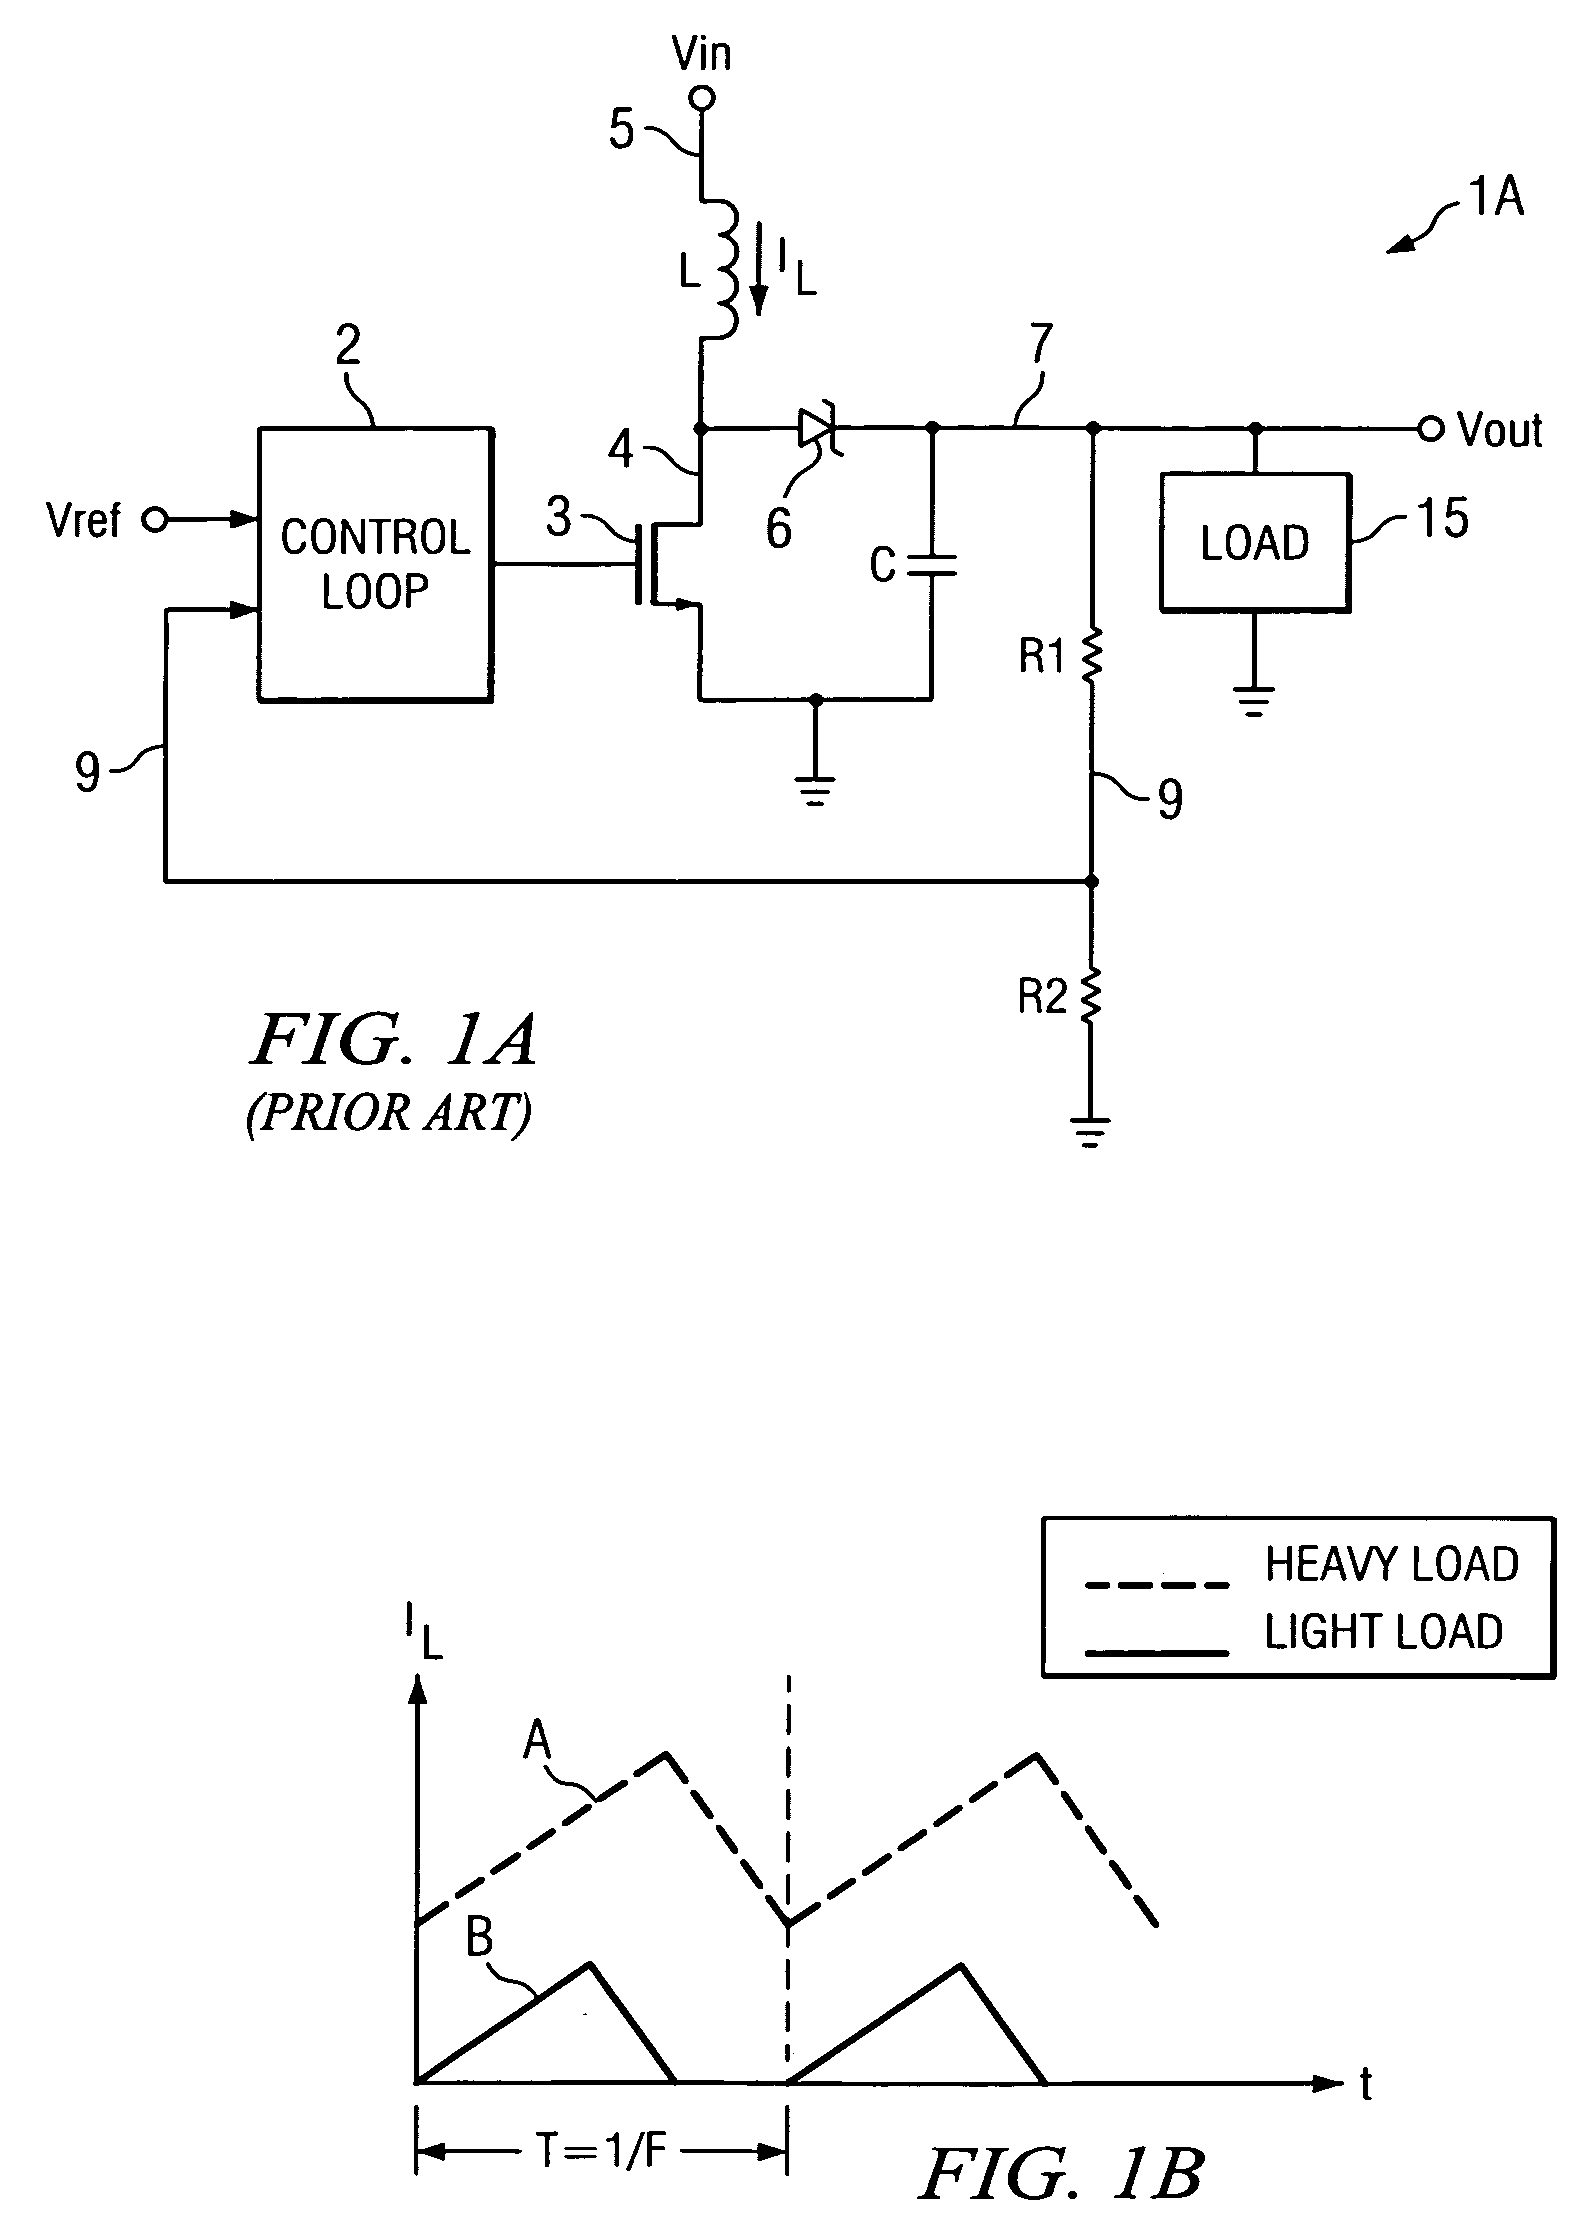 Predictive duty ratio generating circuit and method for synchronous boost converters operating in PFM mode